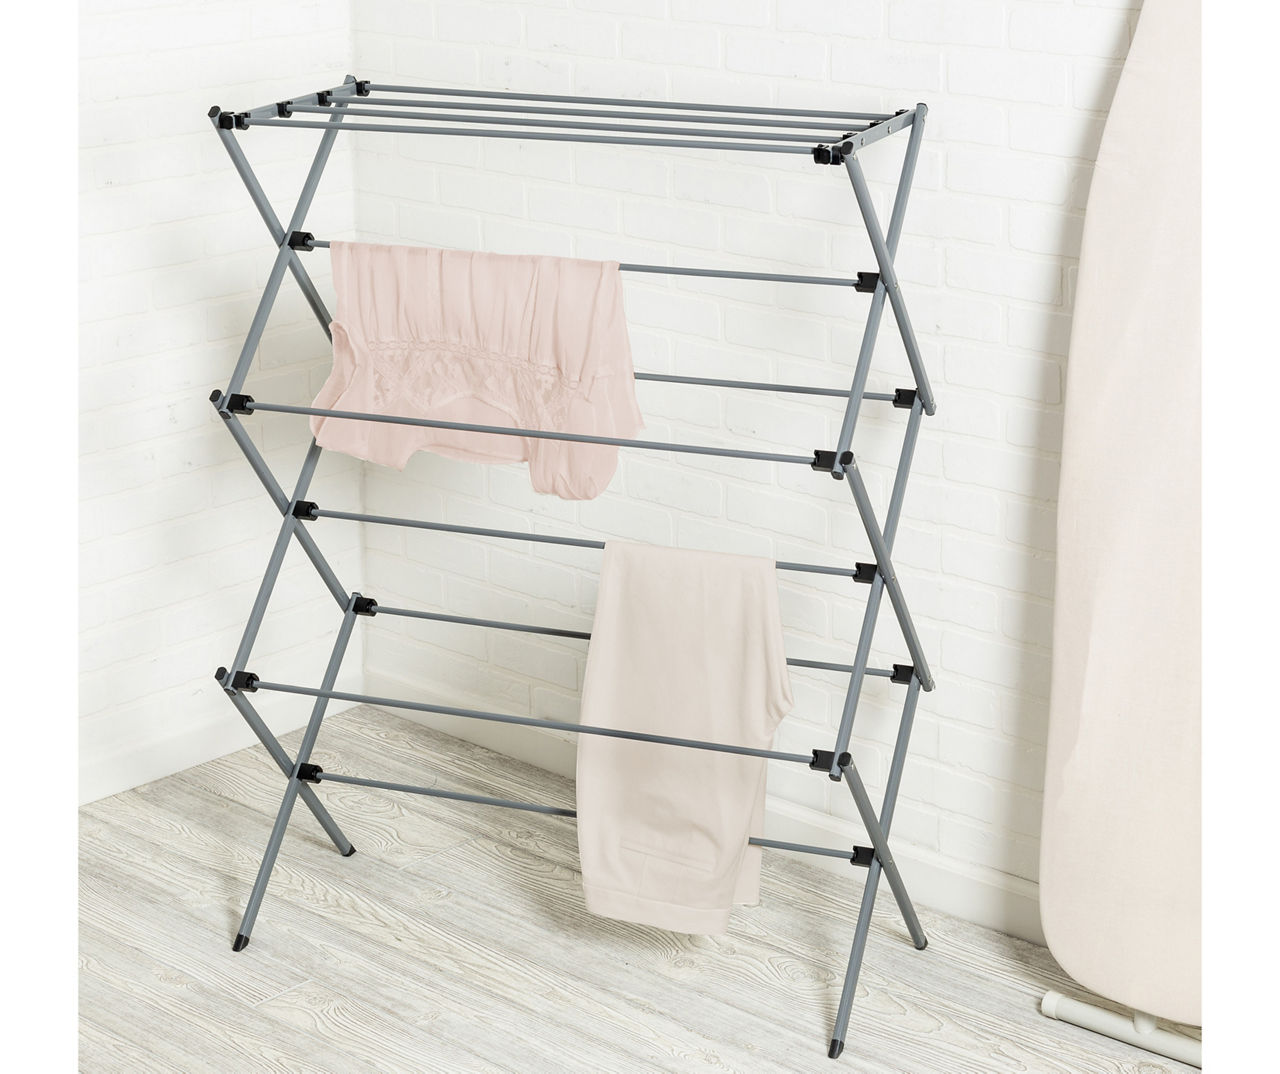 Honey-Can-Do Compact Folding Metal Clothes Drying Rack 